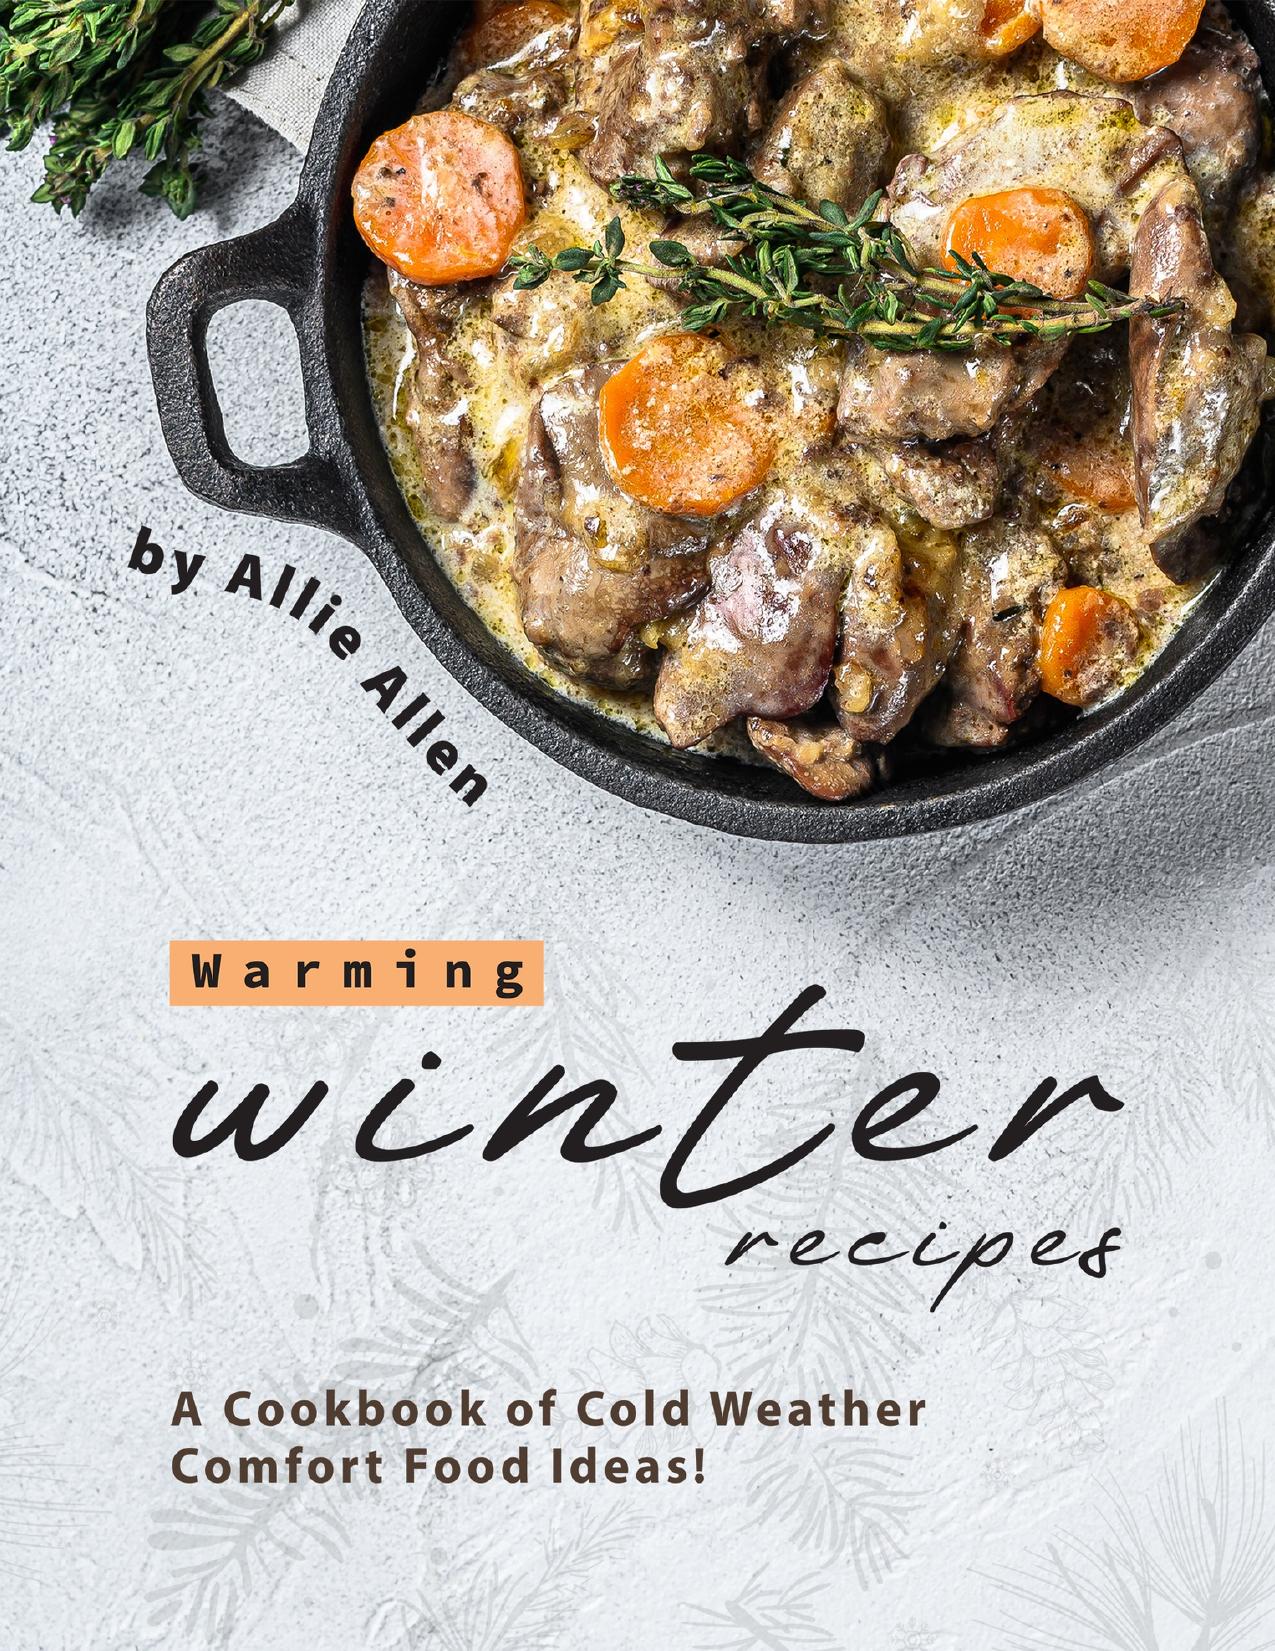 Warming Winter Recipes: A Cookbook of Cold Weather Comfort Food Ideas! by Allen Allie